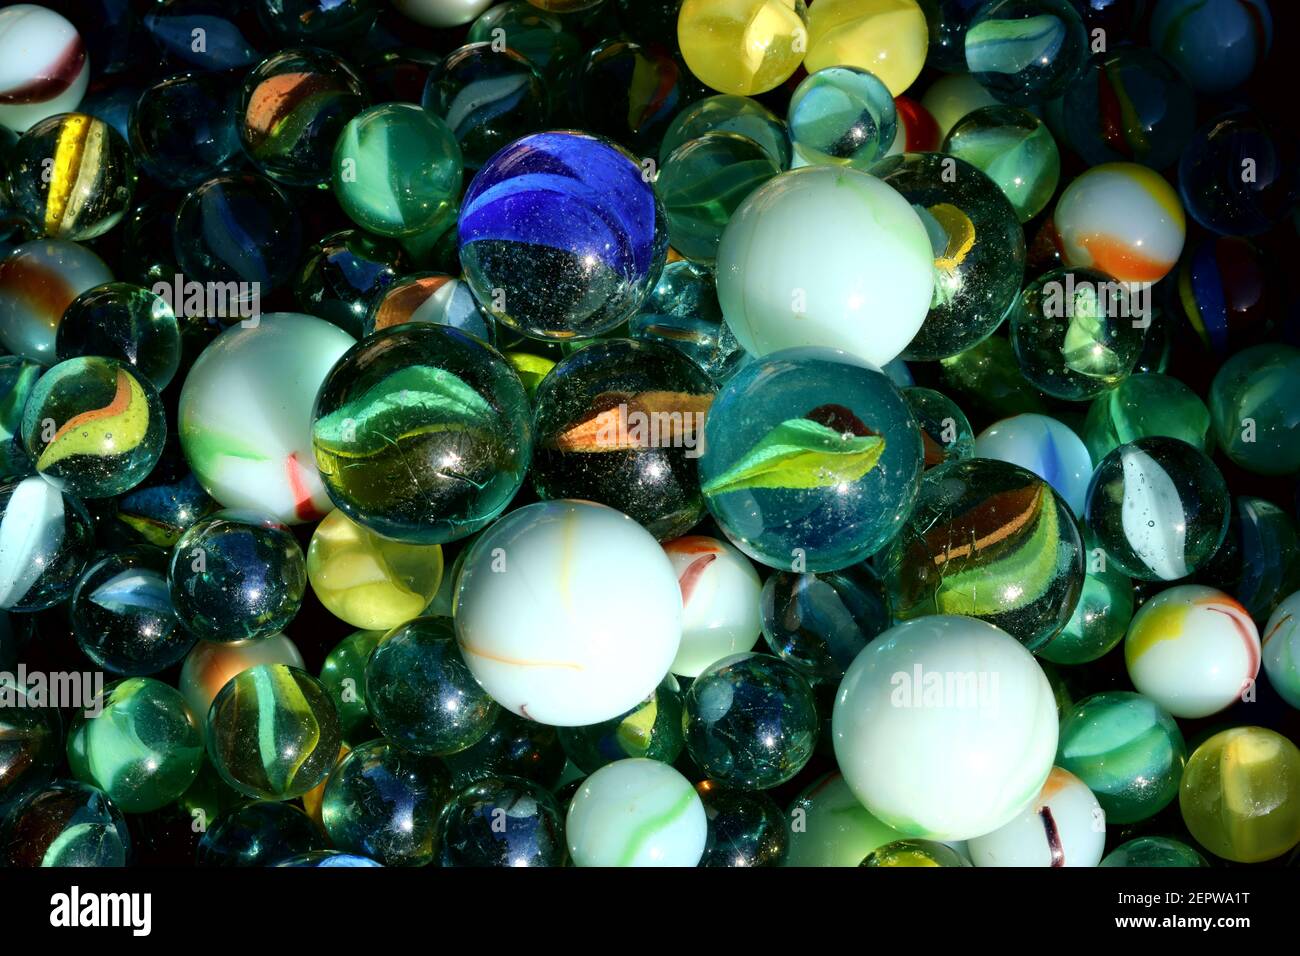 A Big Green Glass Marble Between Yellow Green Blue And Red Marbles On A  Table Stock Photo - Download Image Now - iStock